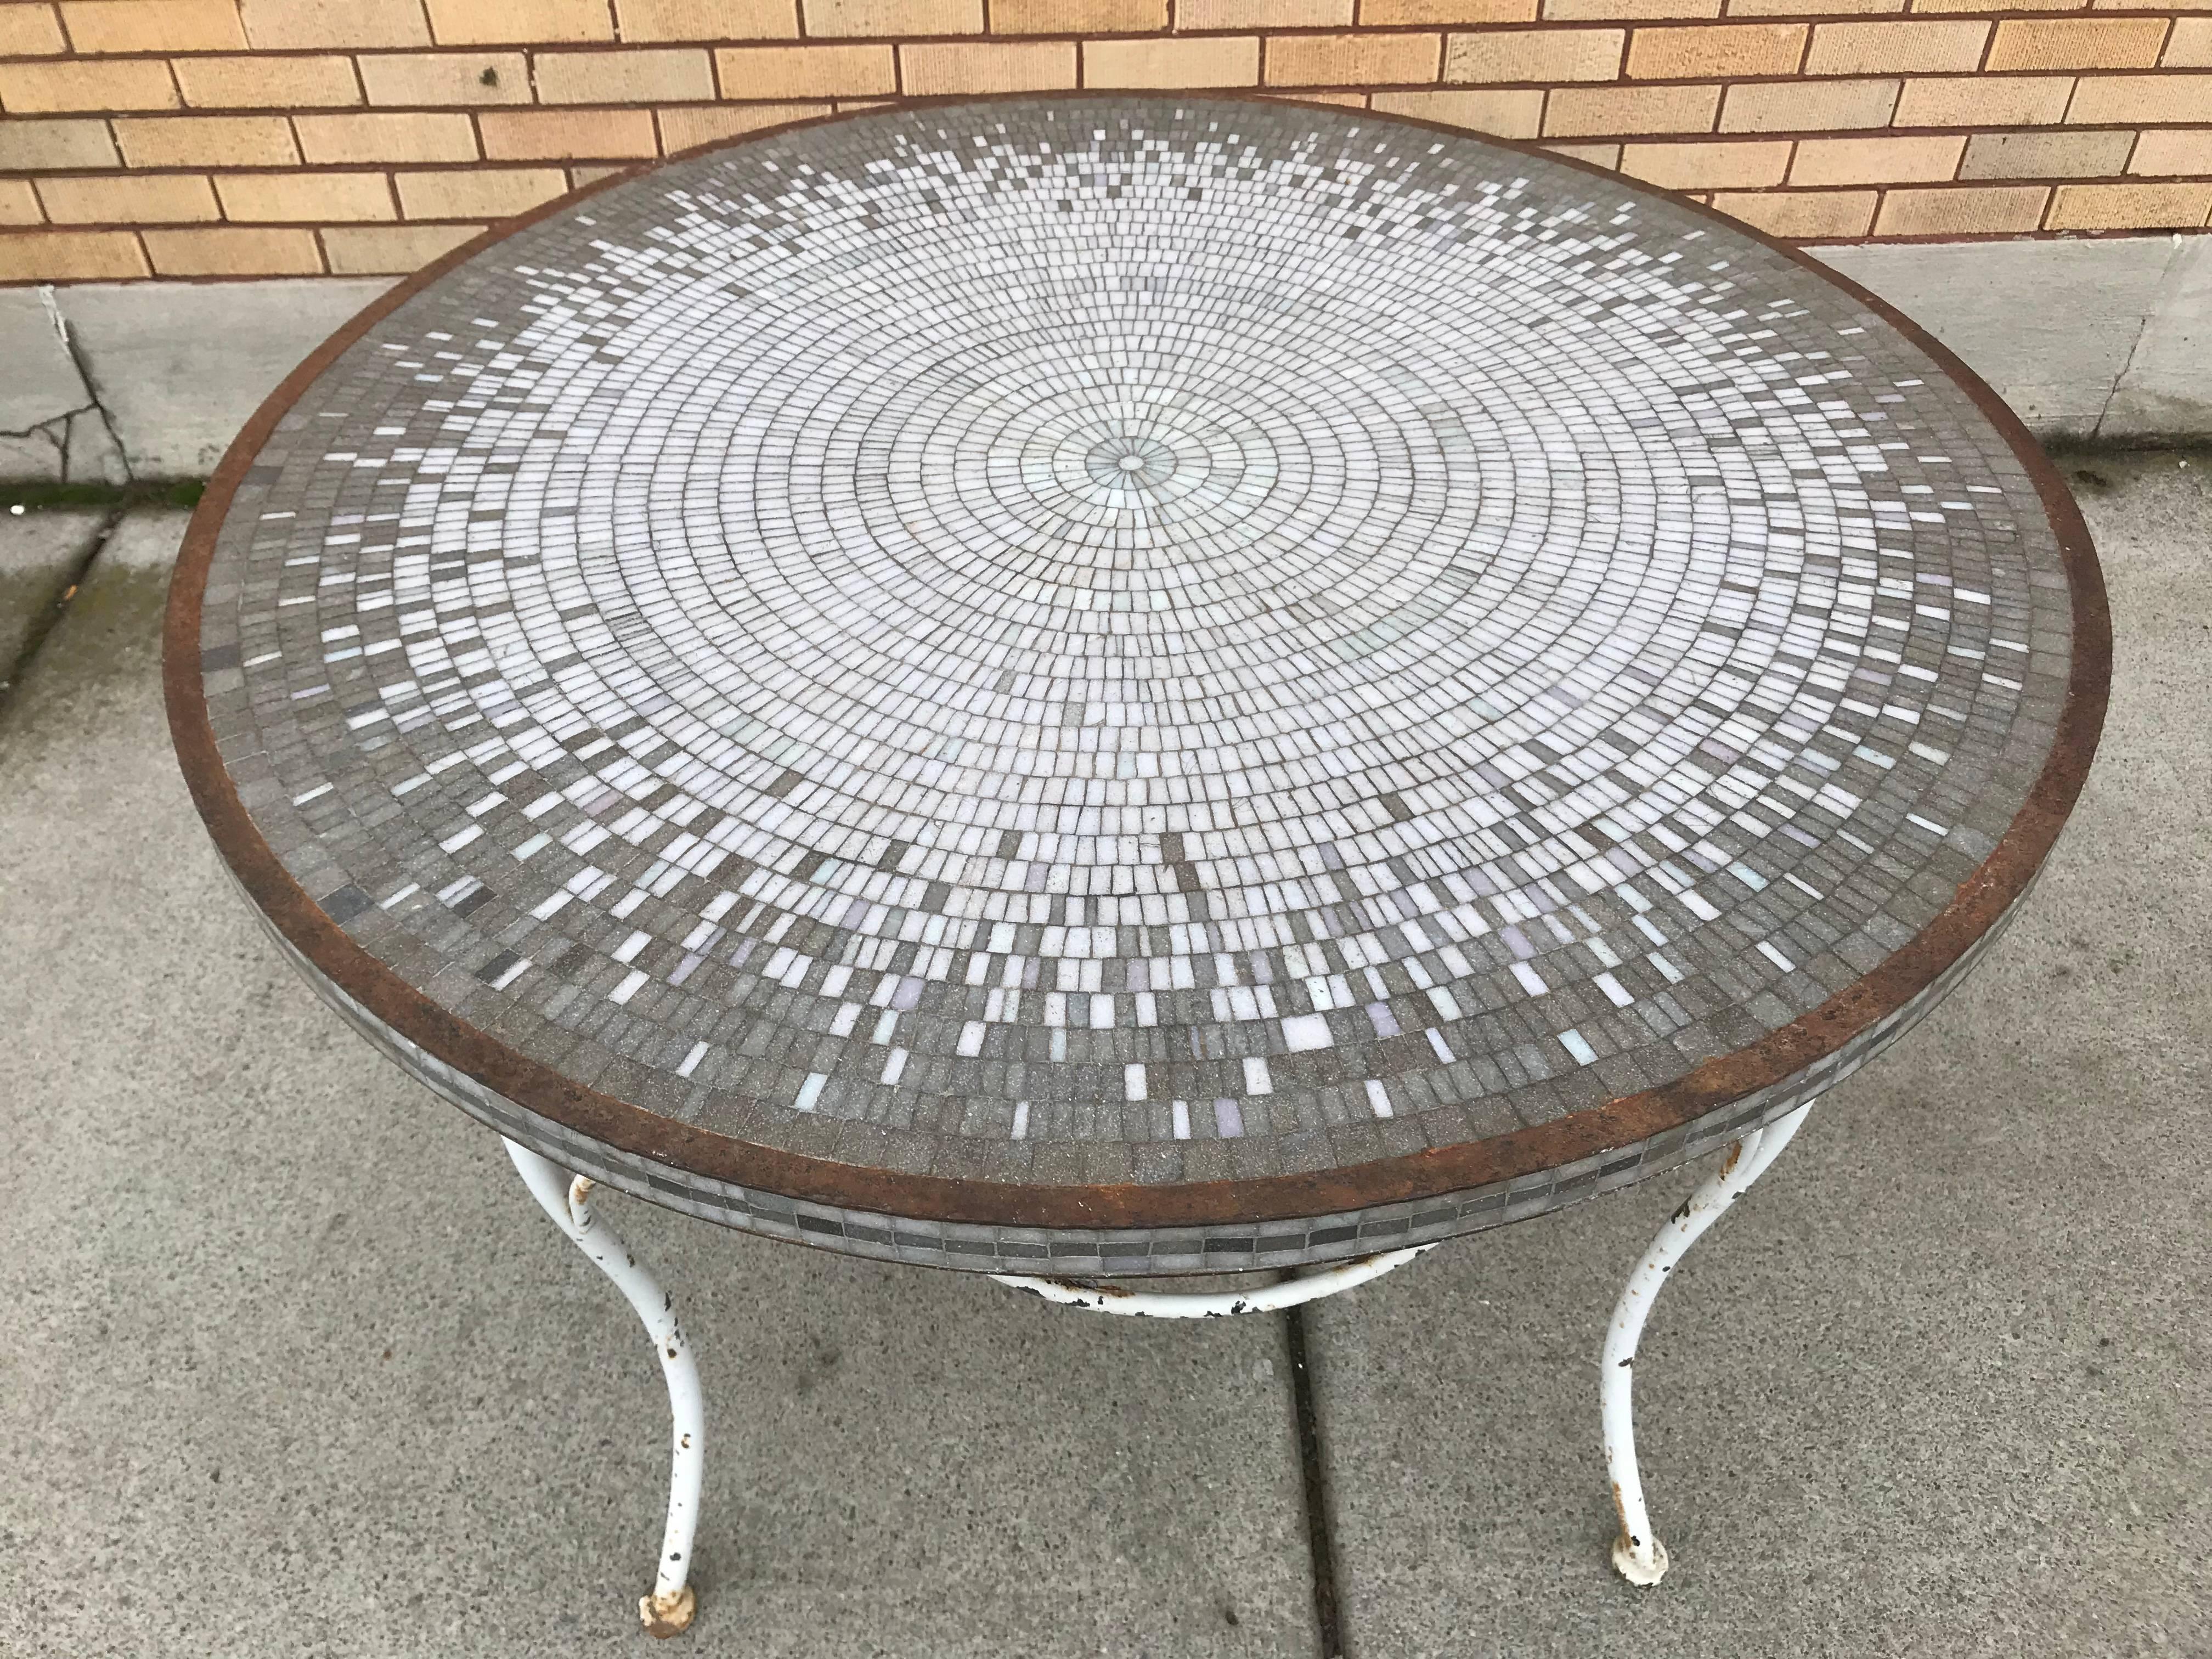 Modernist Spalti (glass) mosaic tile dining top table. Superior quality. Very well executed. Iron surround, decorative metal table base, large and heavy.